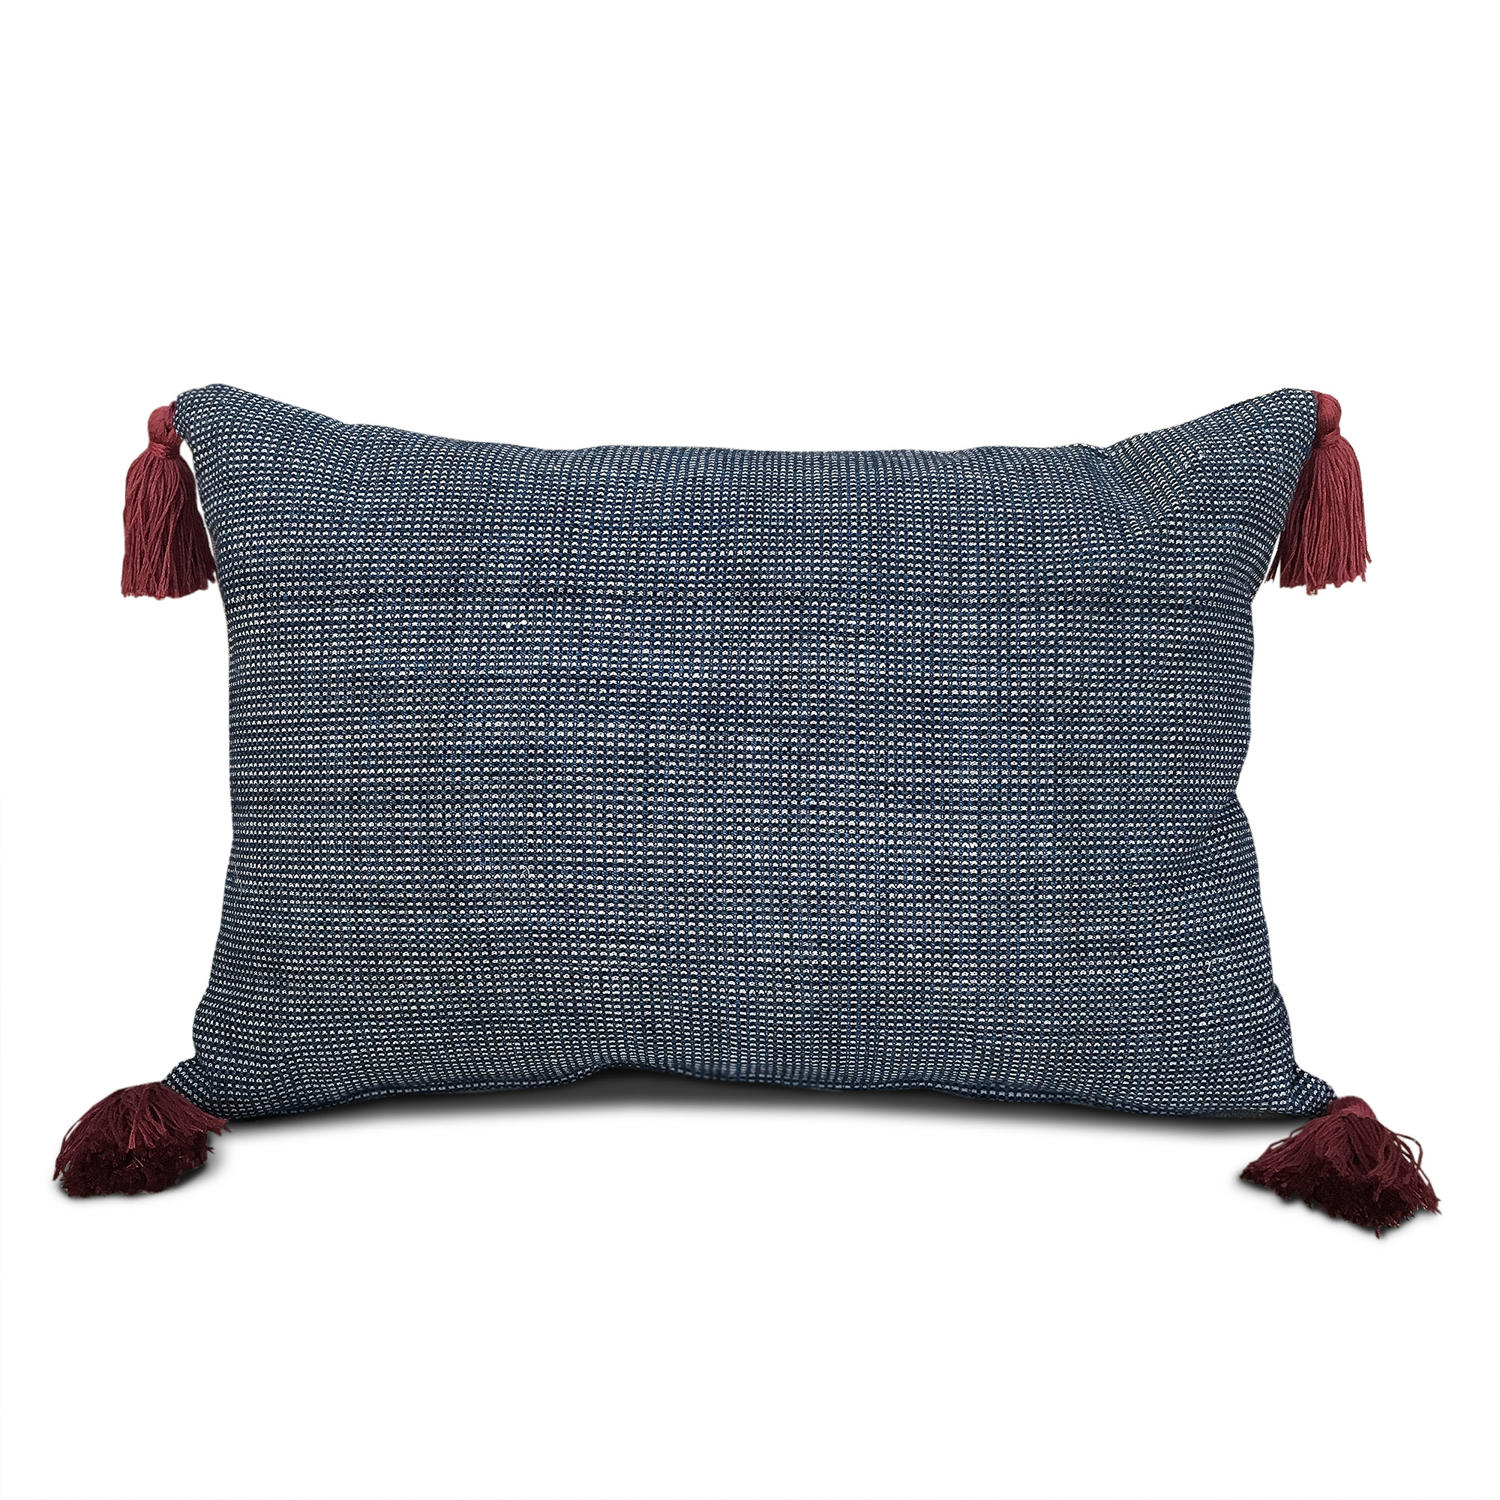 Shui Cushions with Red Tassels